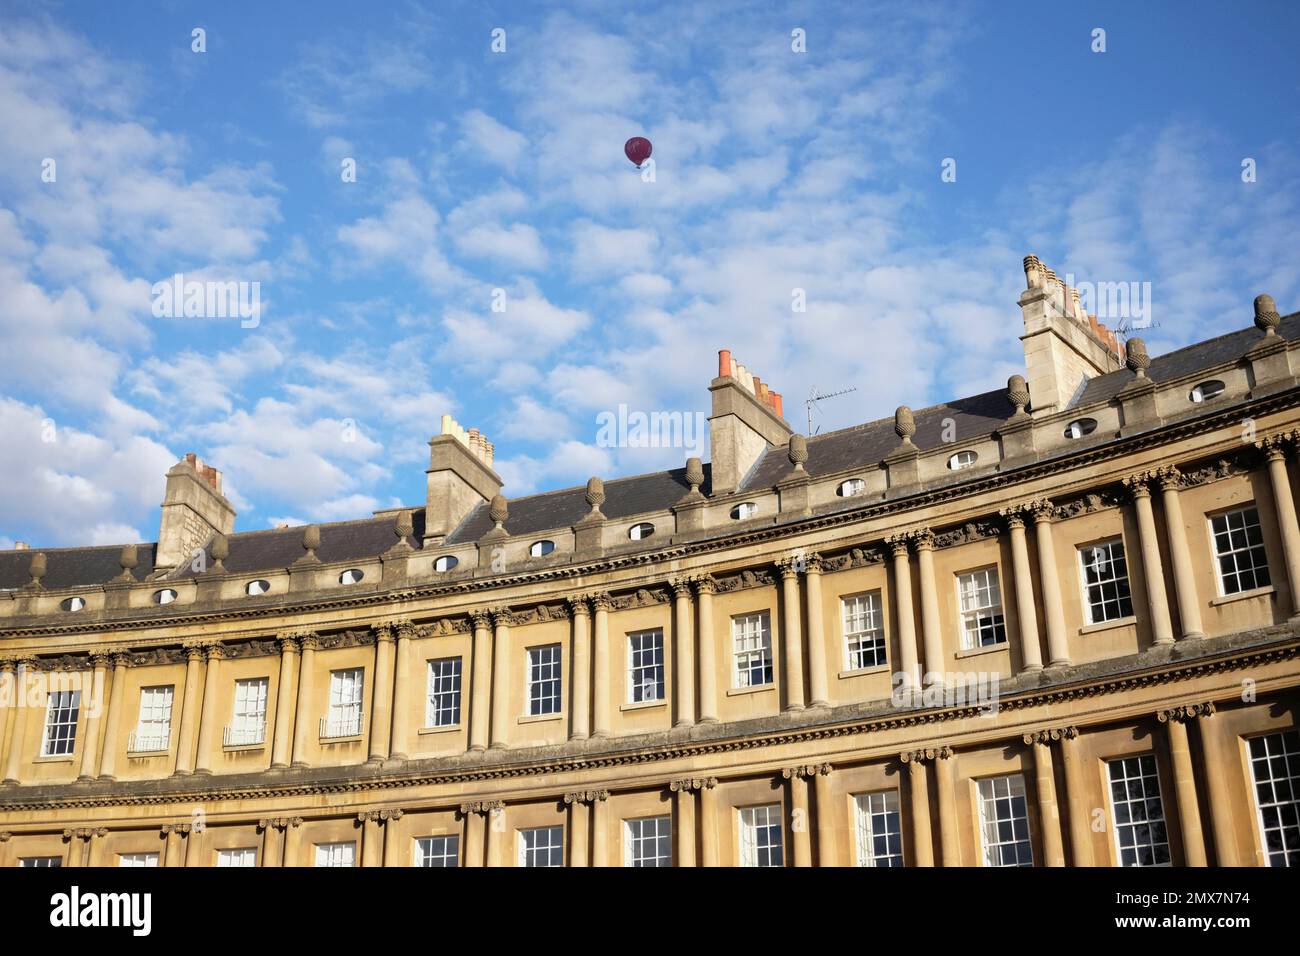 England, Bath, Exterior view of Royal Crescent with red hot air balloon in the blue sky with Cirrocumulus clouds. Stock Photo